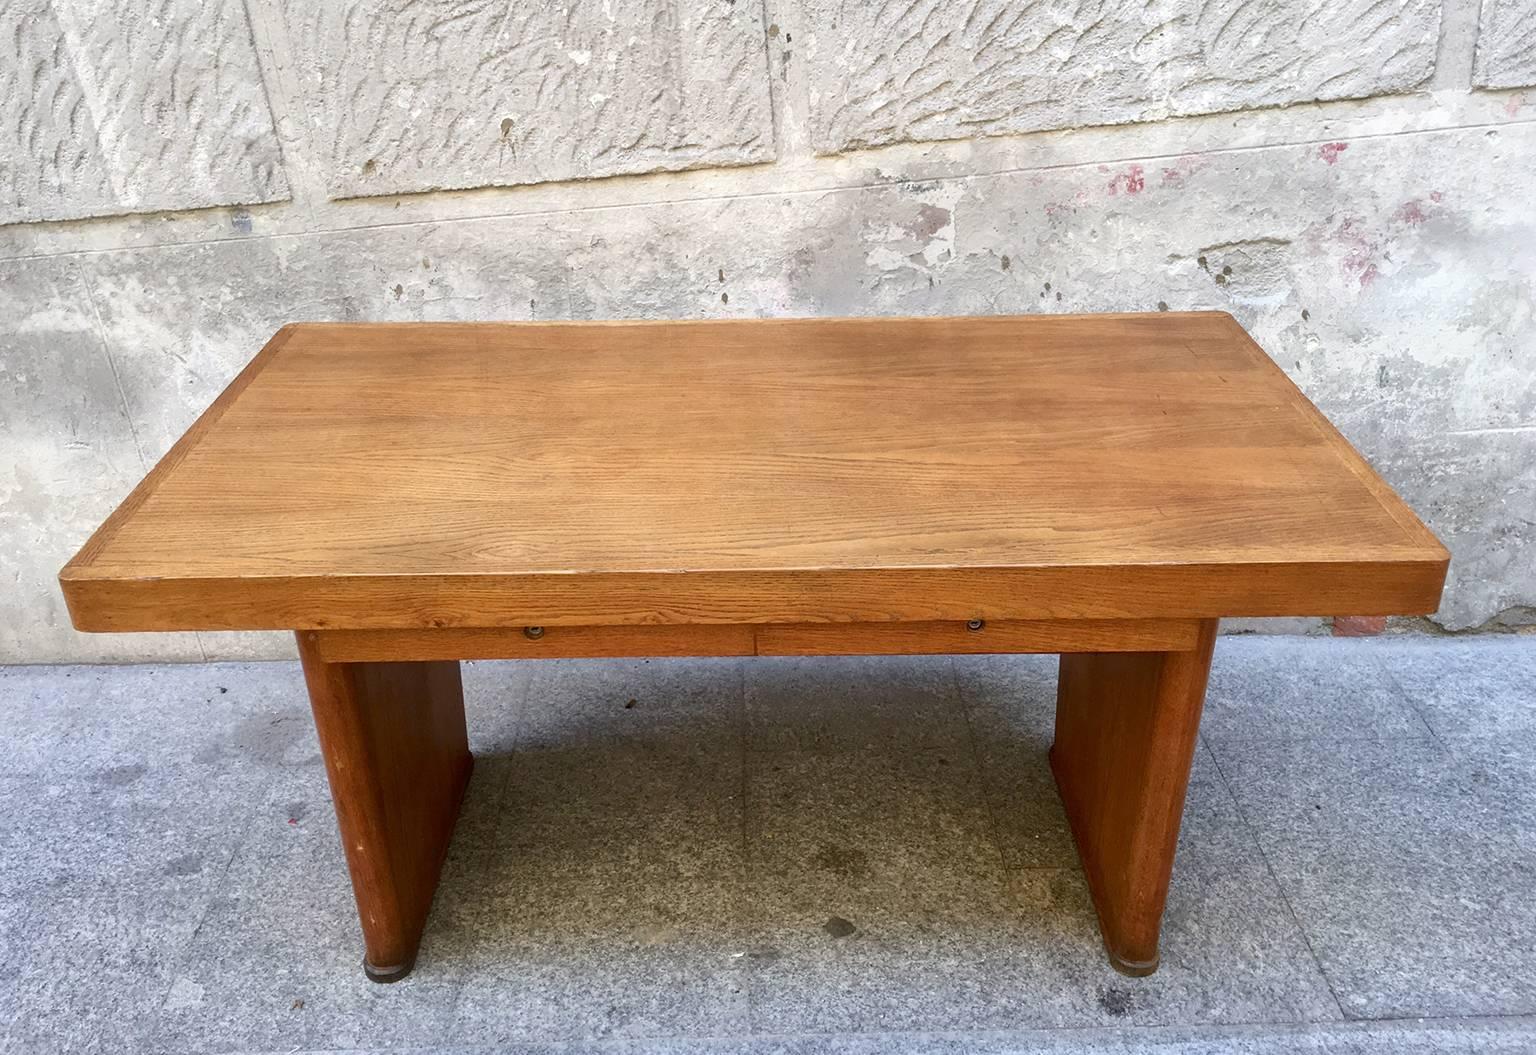  Rare Mid-Century Modern walnut table desk table Pierre Chapo style ,with two drawers.